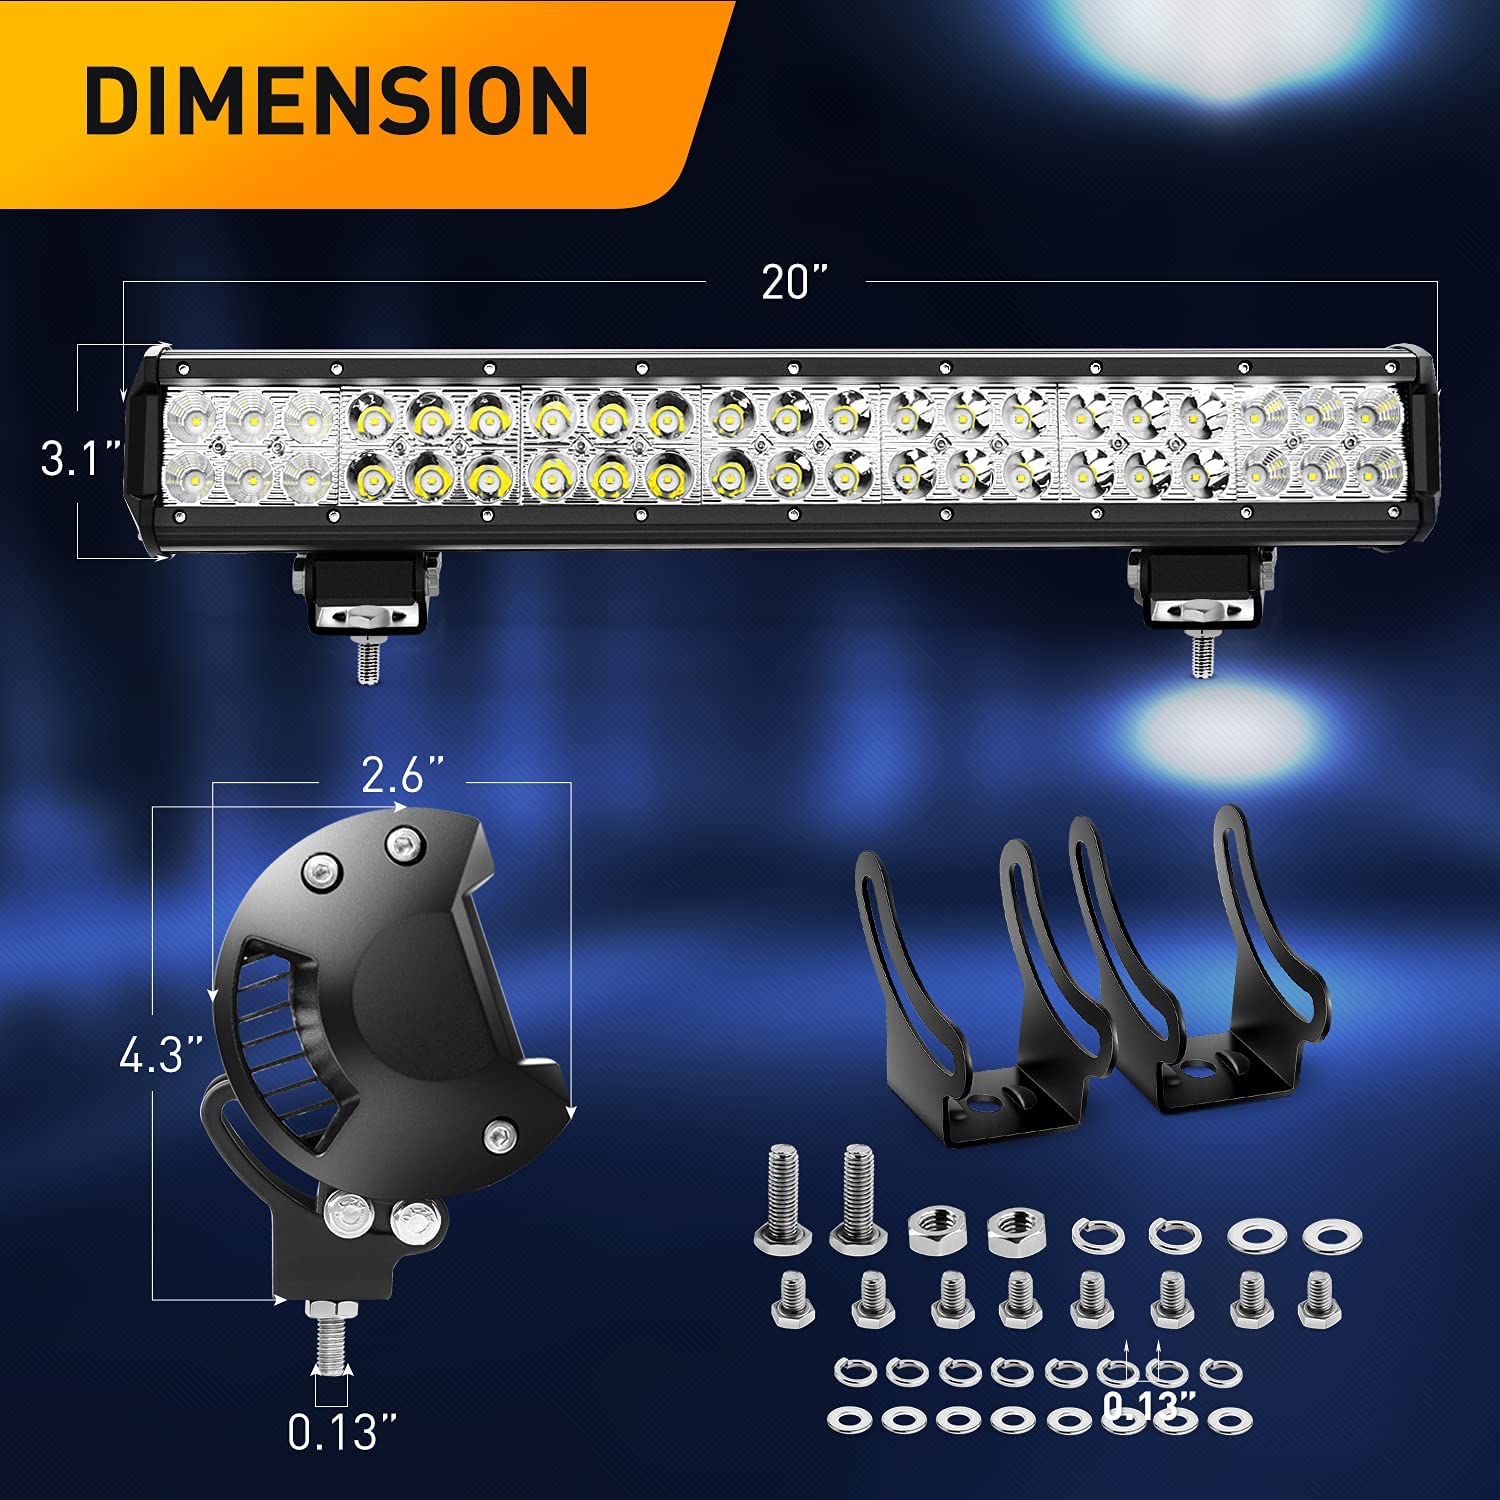 20 Inch 126W 11340LM LED Light Bar Spot Flood Combo with 12V 5Pin Rocker Switch Wiring Harness kit